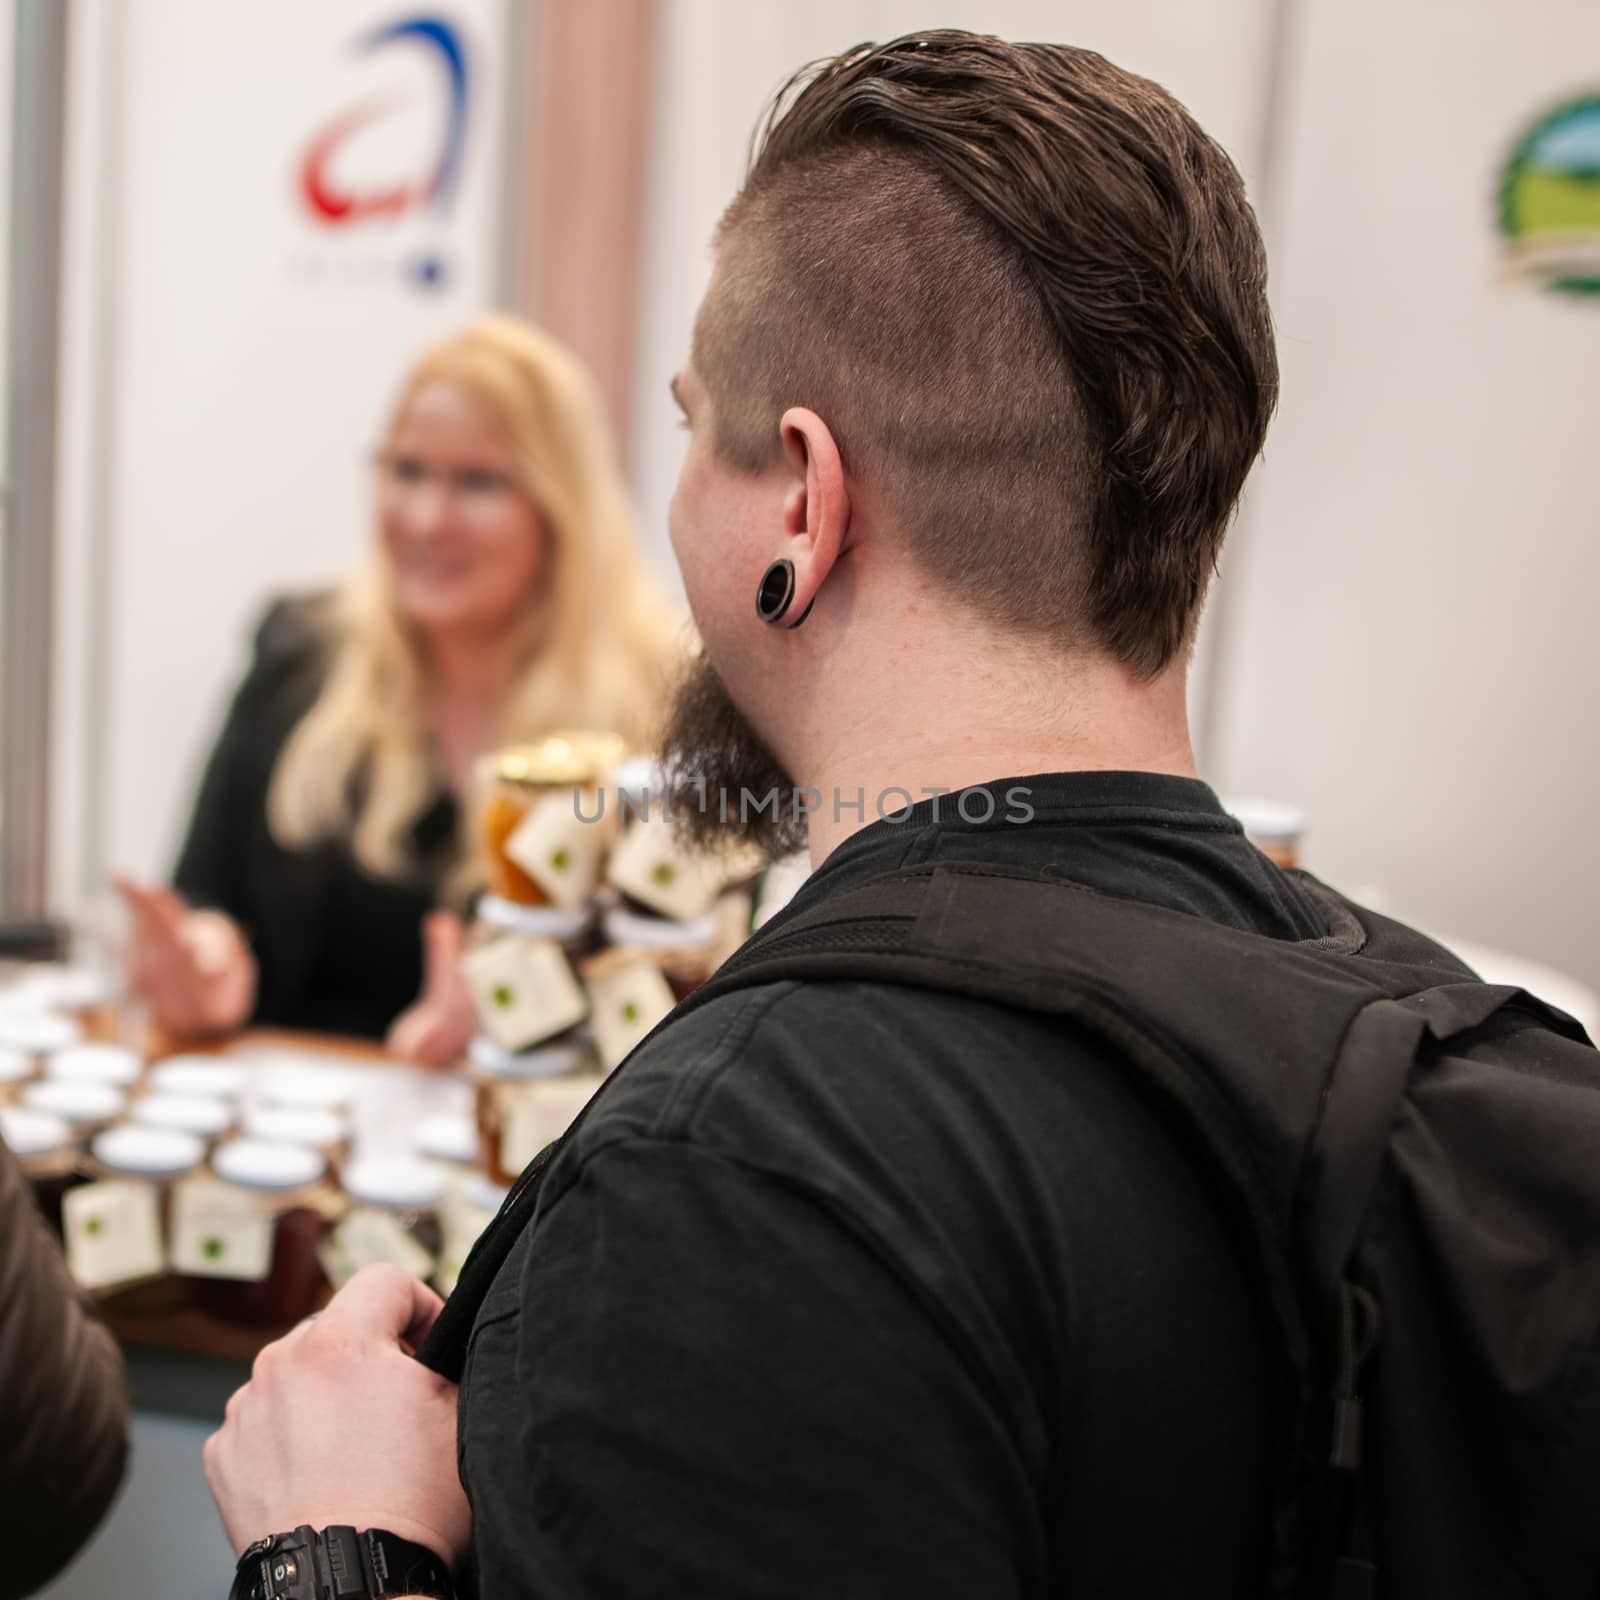 03/04/2018. Brno, Czech Republic. Young men having a conversation while attending an event at the convention trade center in Brno. BVV Brno Exhibition center. Czech Republic by gonzalobell